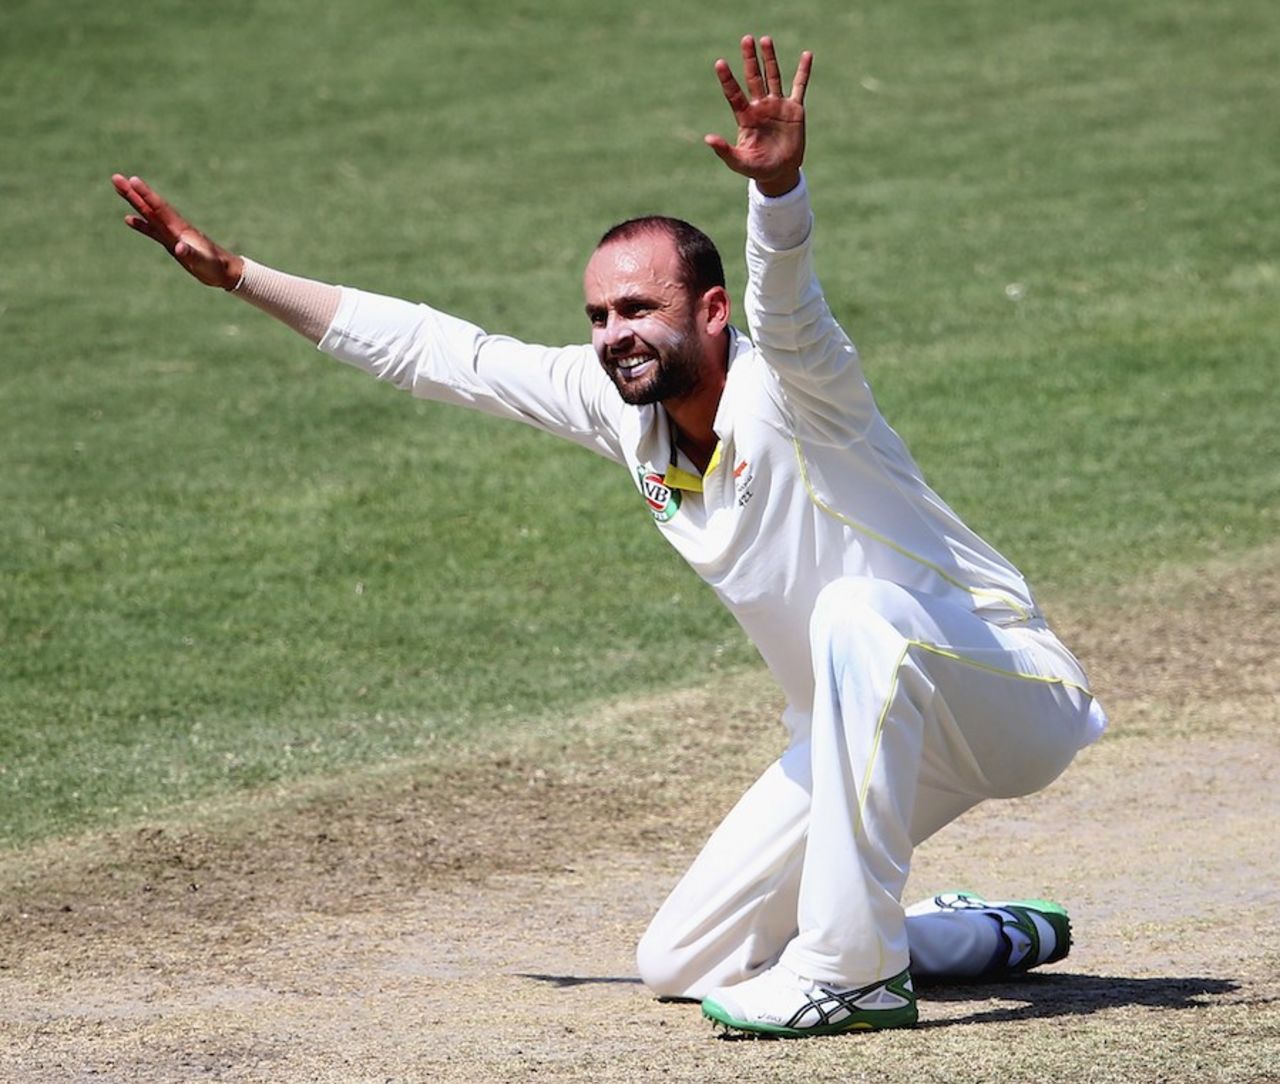 Nathan Lyon appeals for a wicket, Pakistan A v Australians, 3rd day, Sharjah, October 17, 2014